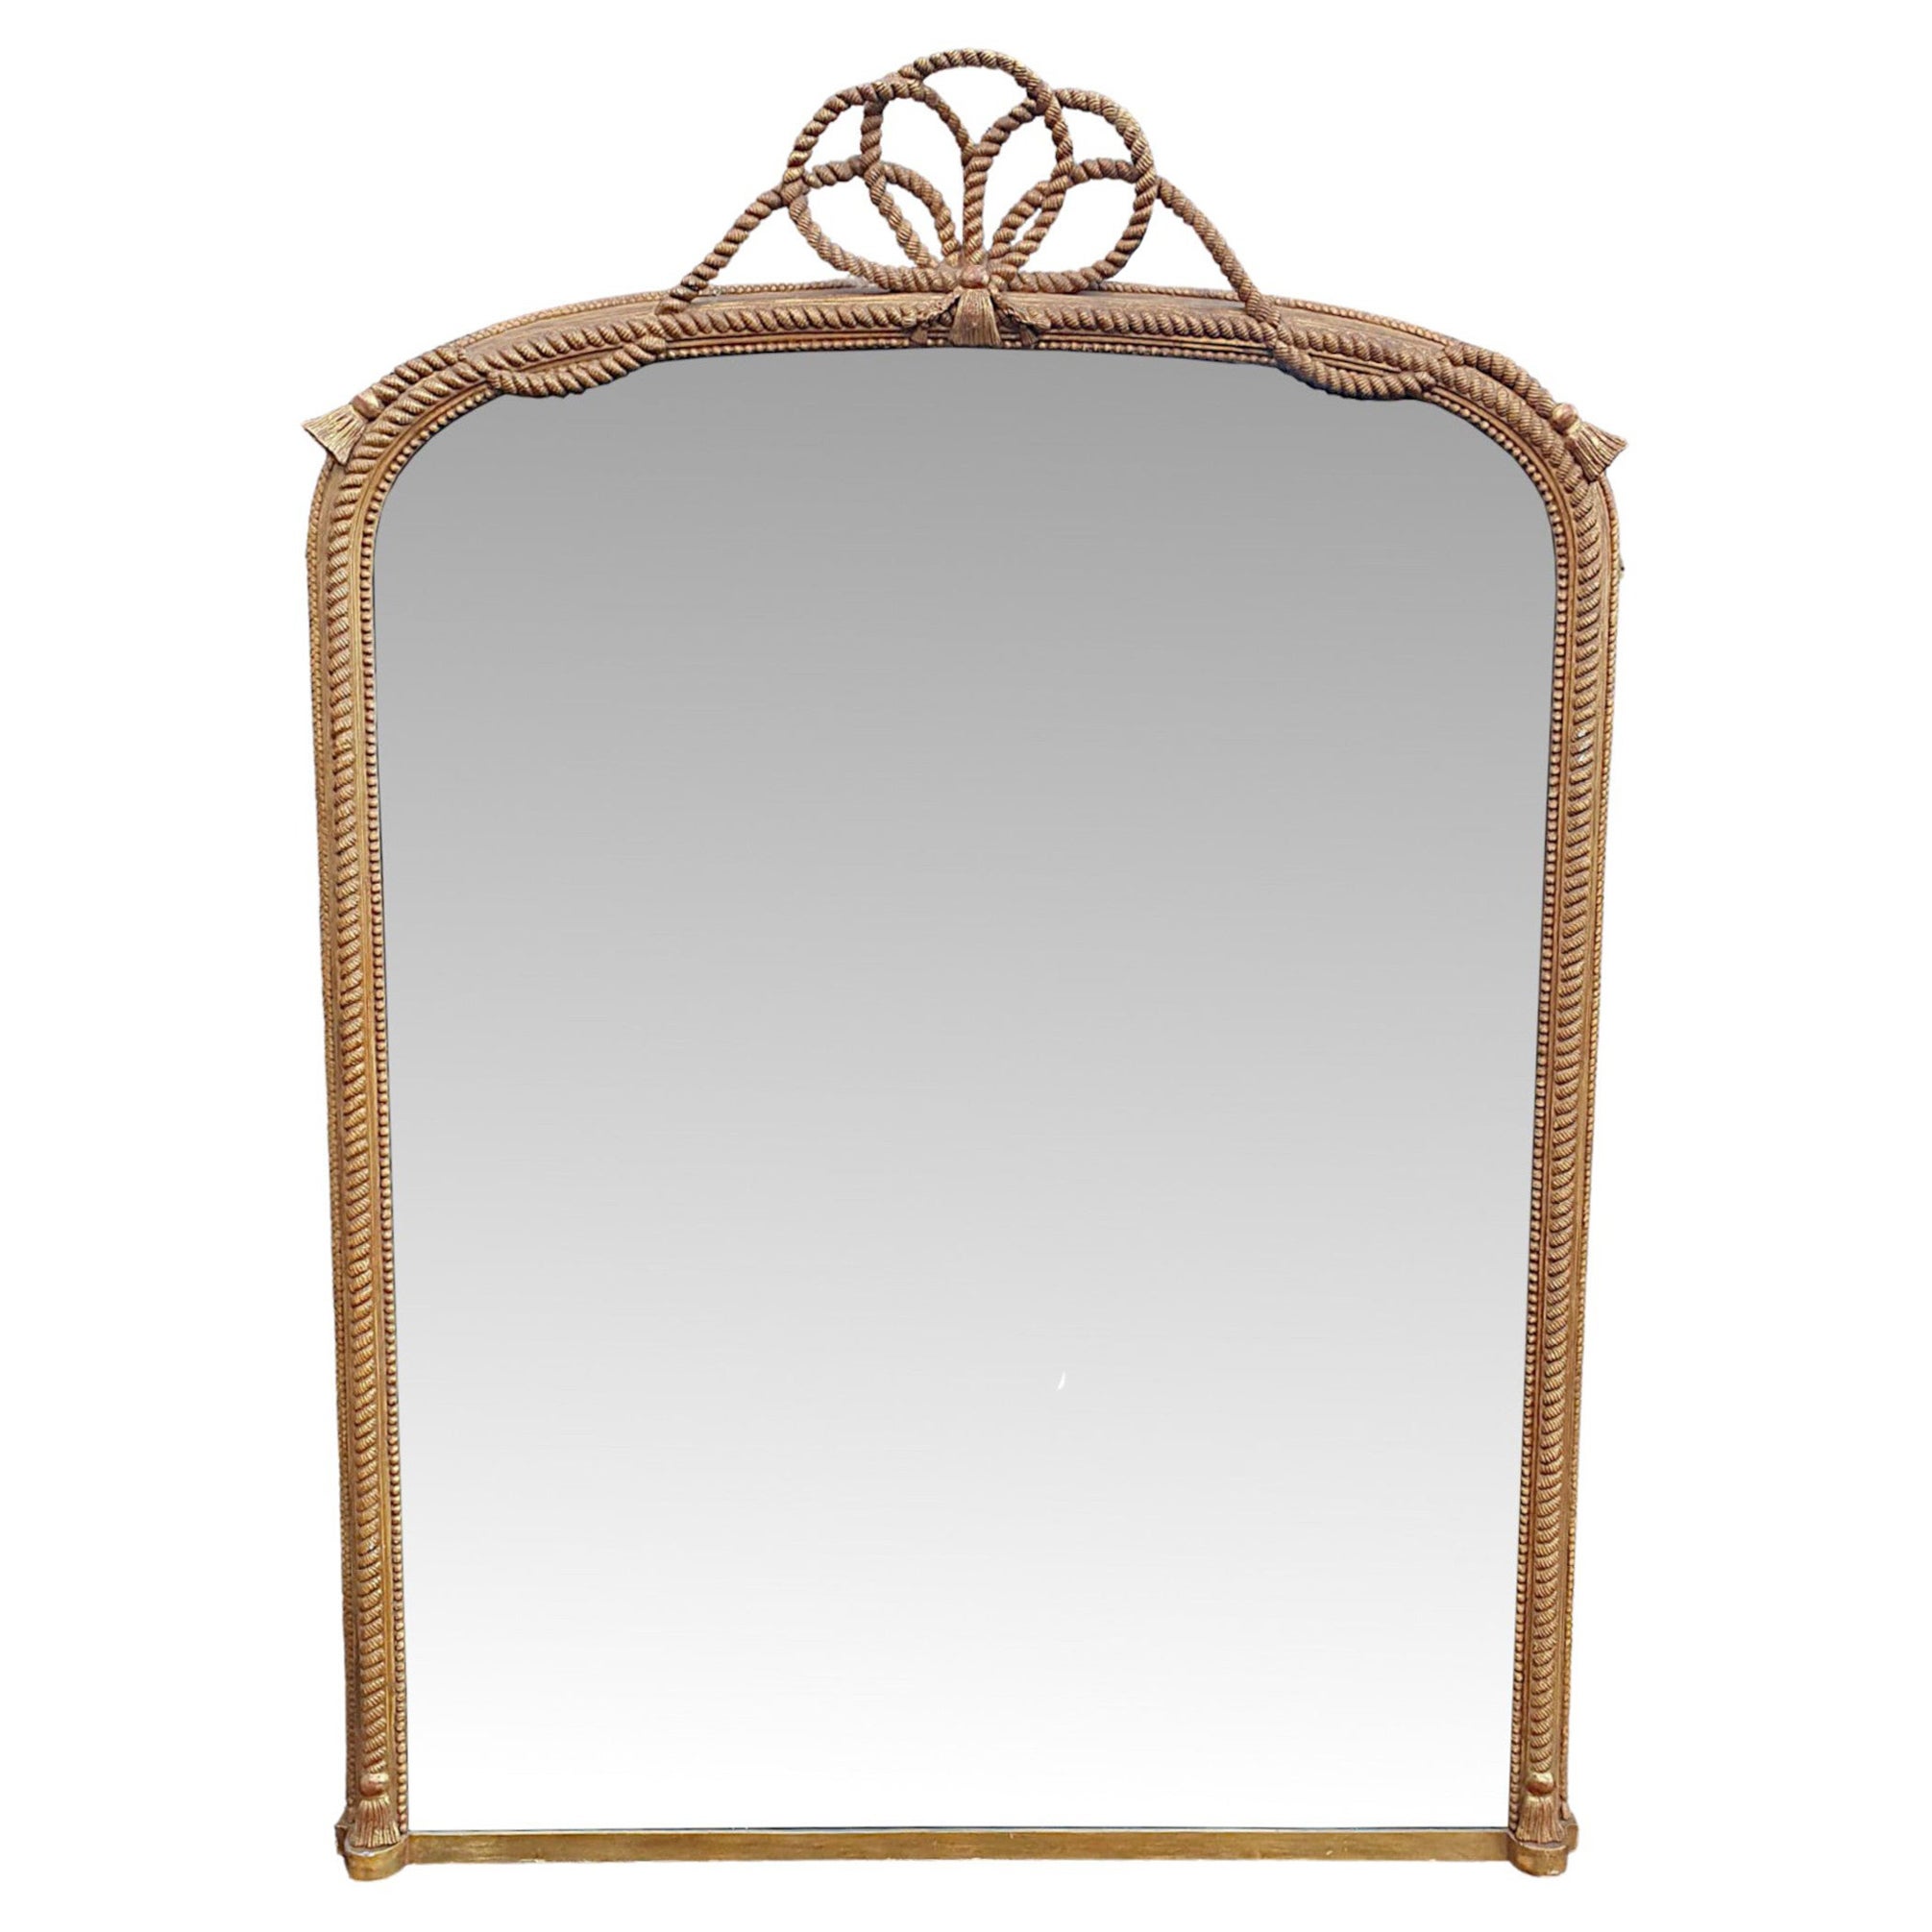 Exceptional 19th Century Giltwood Arch Top Overmantle Mirror For Sale